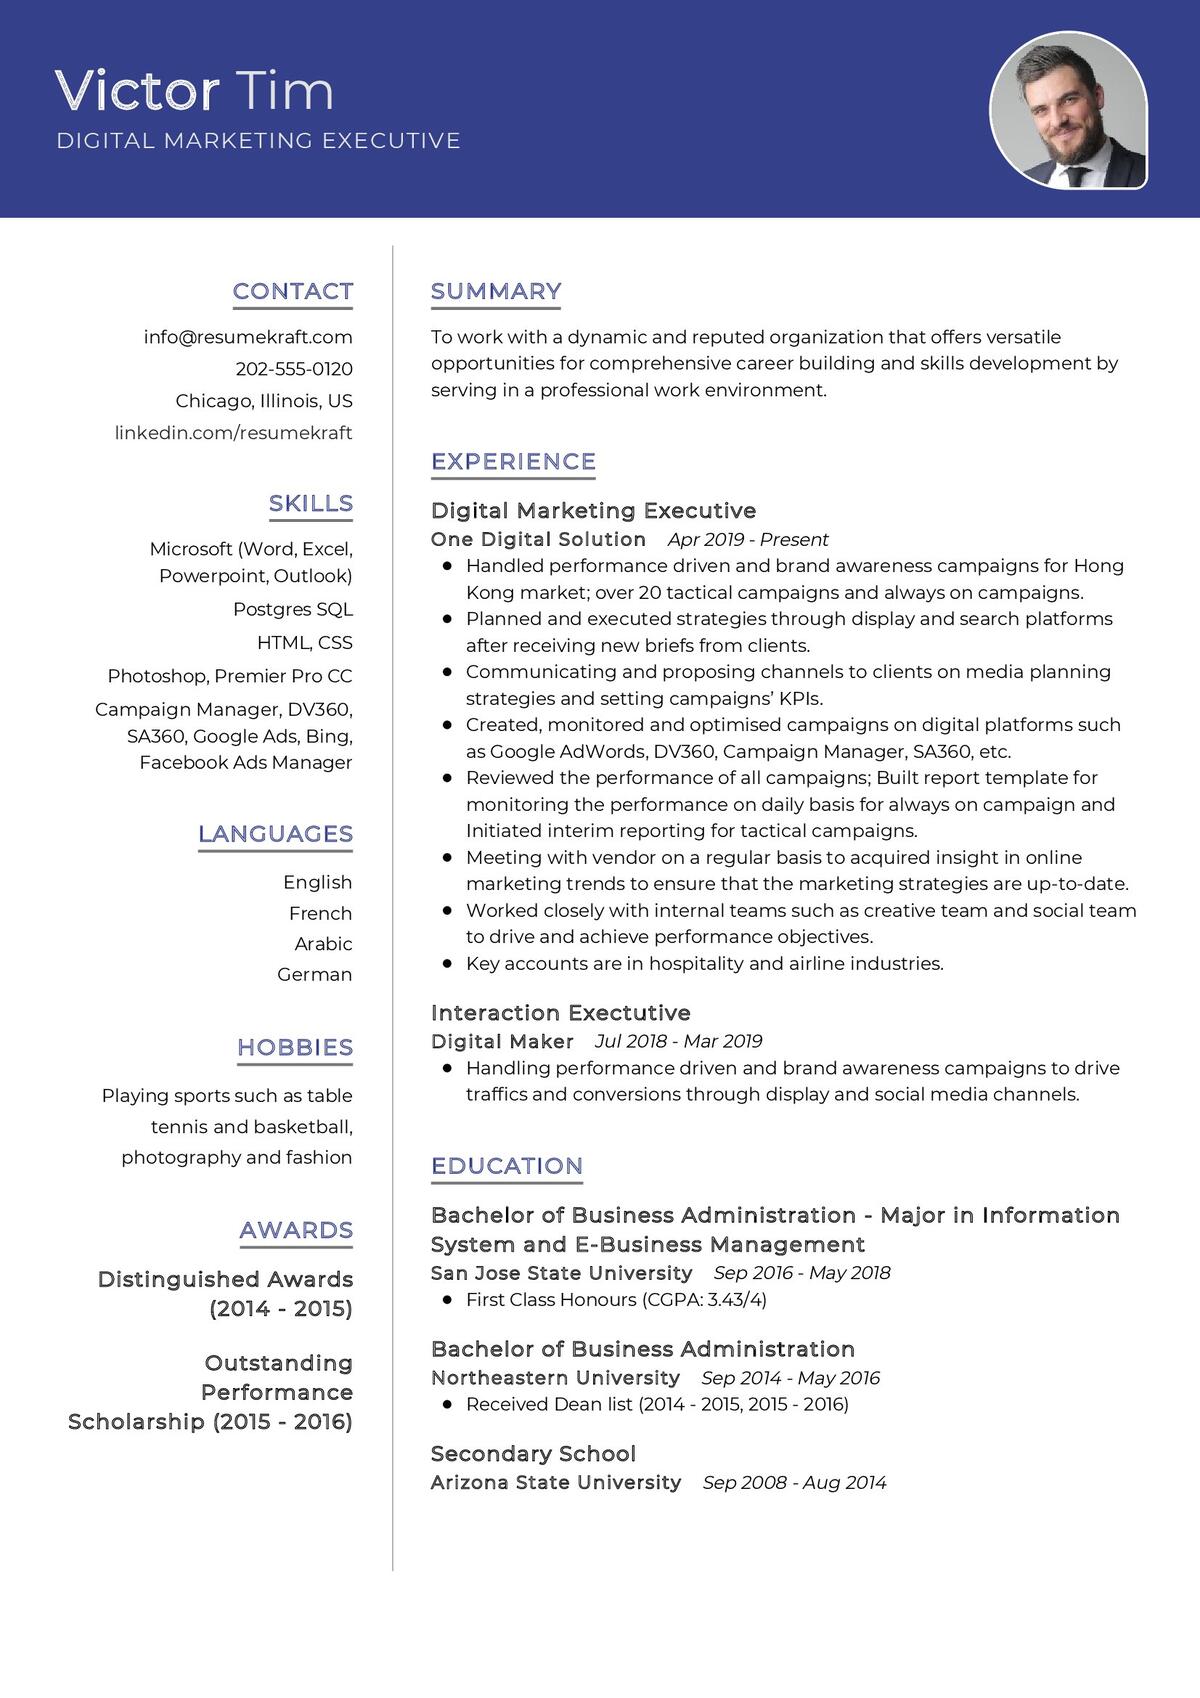 Scholarship Resume: Template, Examples and How to List